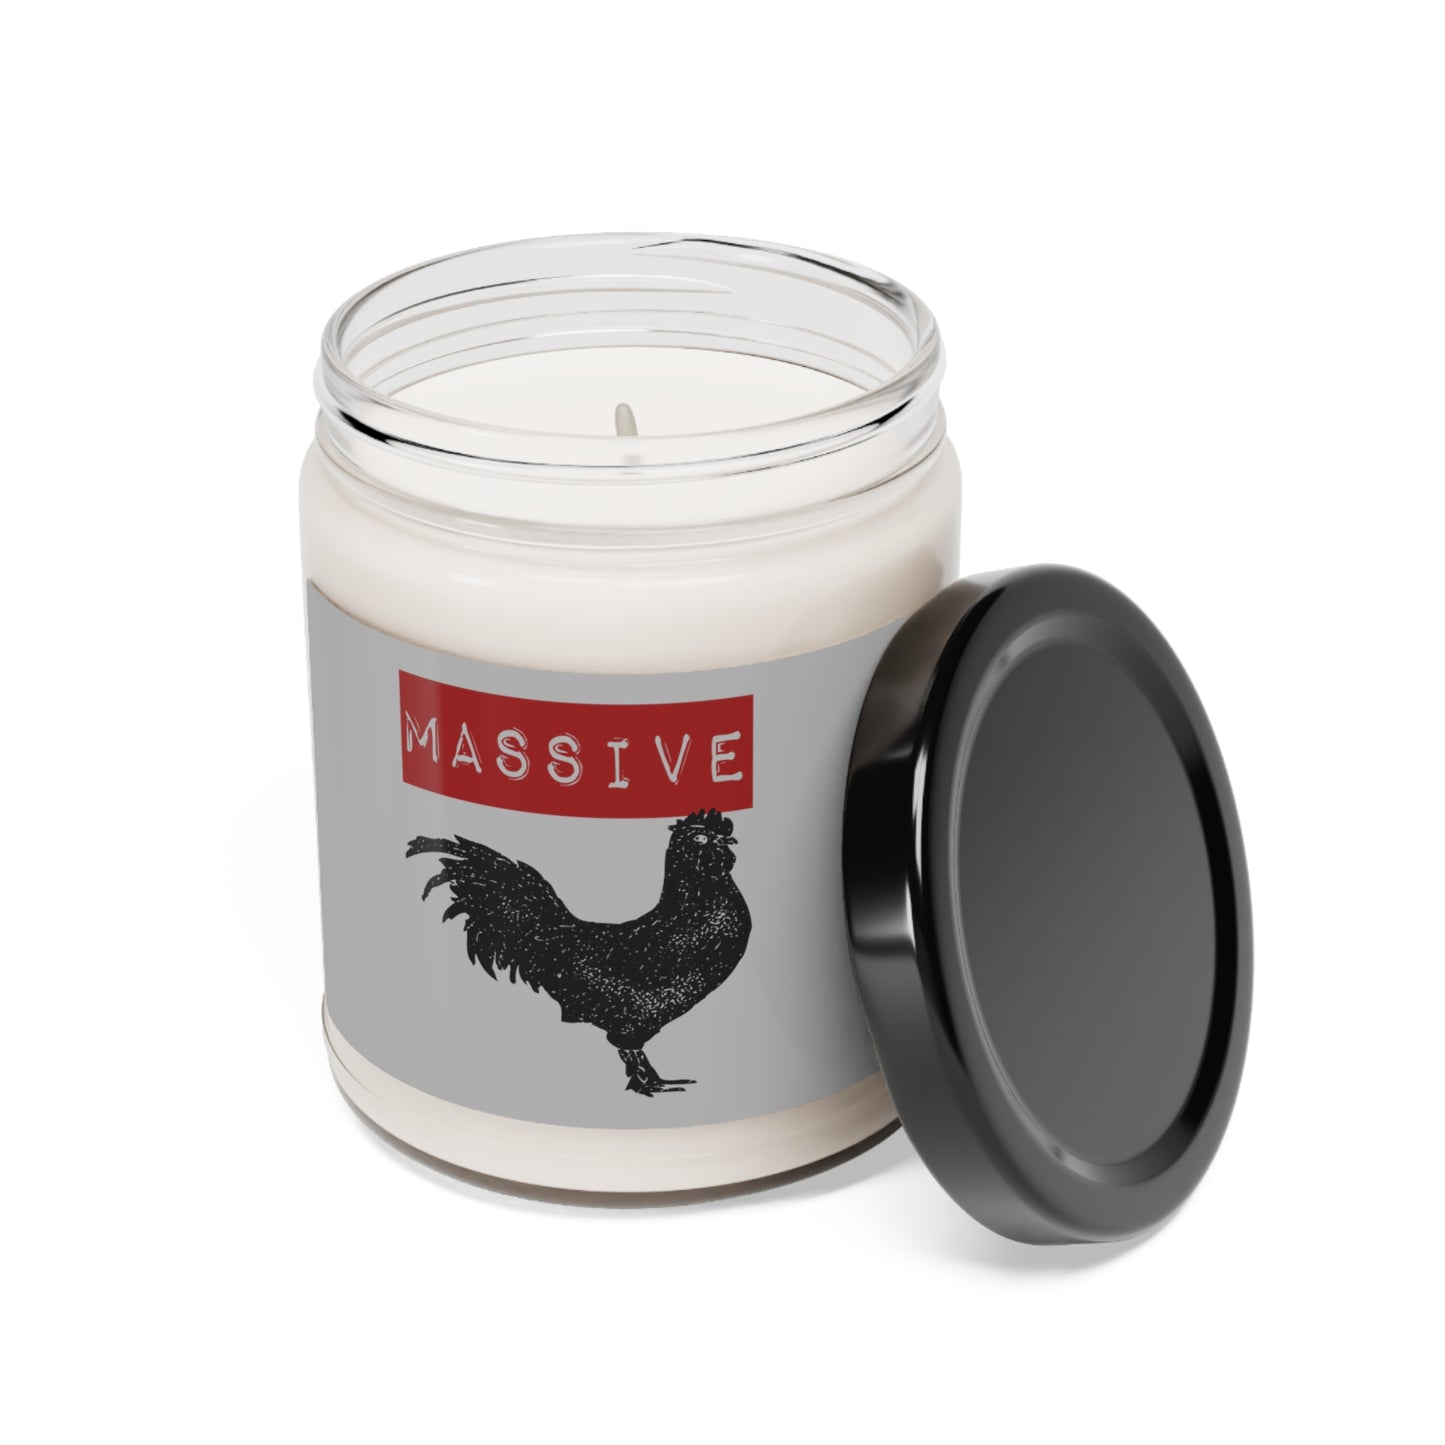 Massive Cock Scented Soy Candle, 9oz